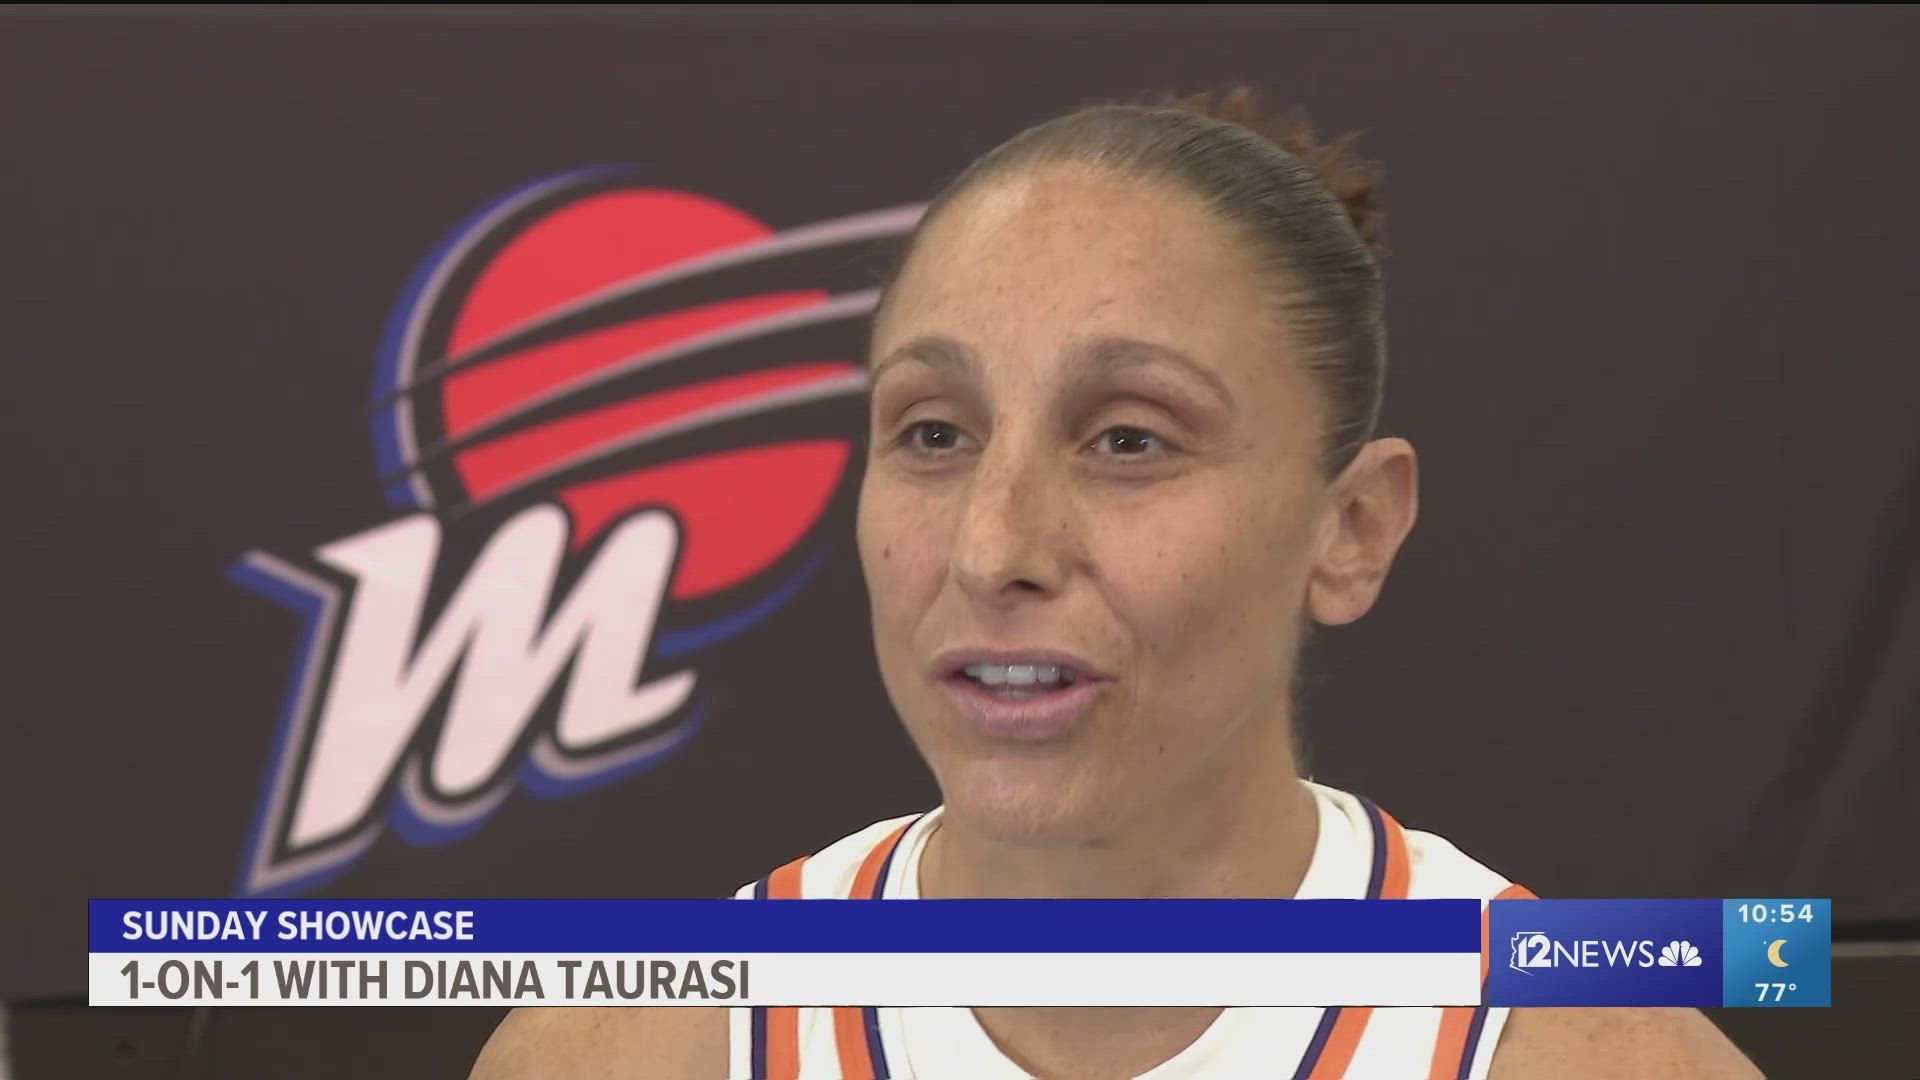 Taurasi signed a two-year extension with the Mercury in February. She was drafted #1 overall in 2004 and has spent her entire career in Phoenix.